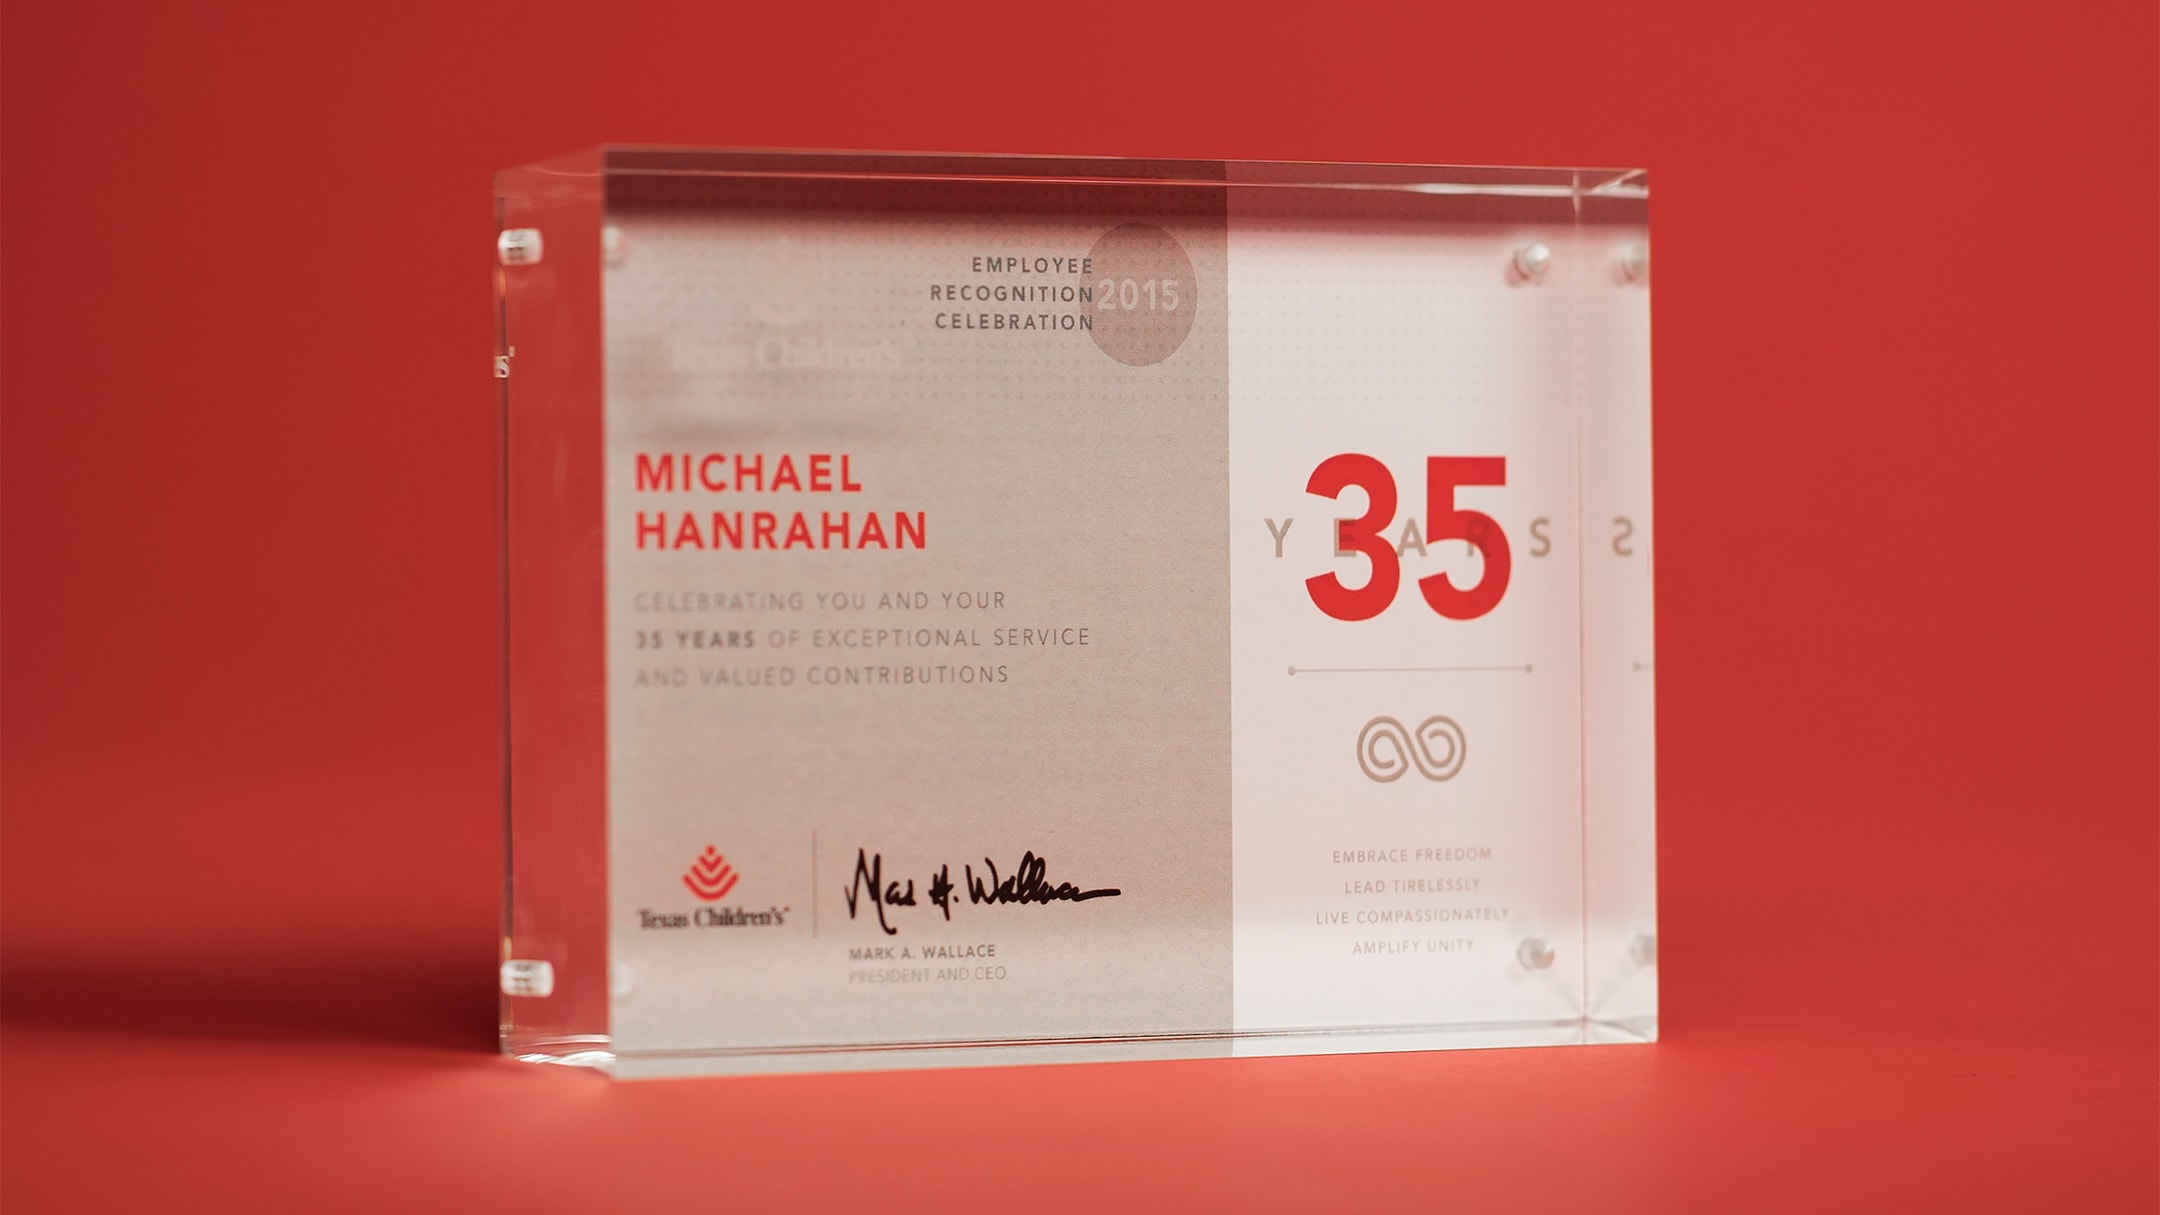 An award celebrating 35 years of employment.